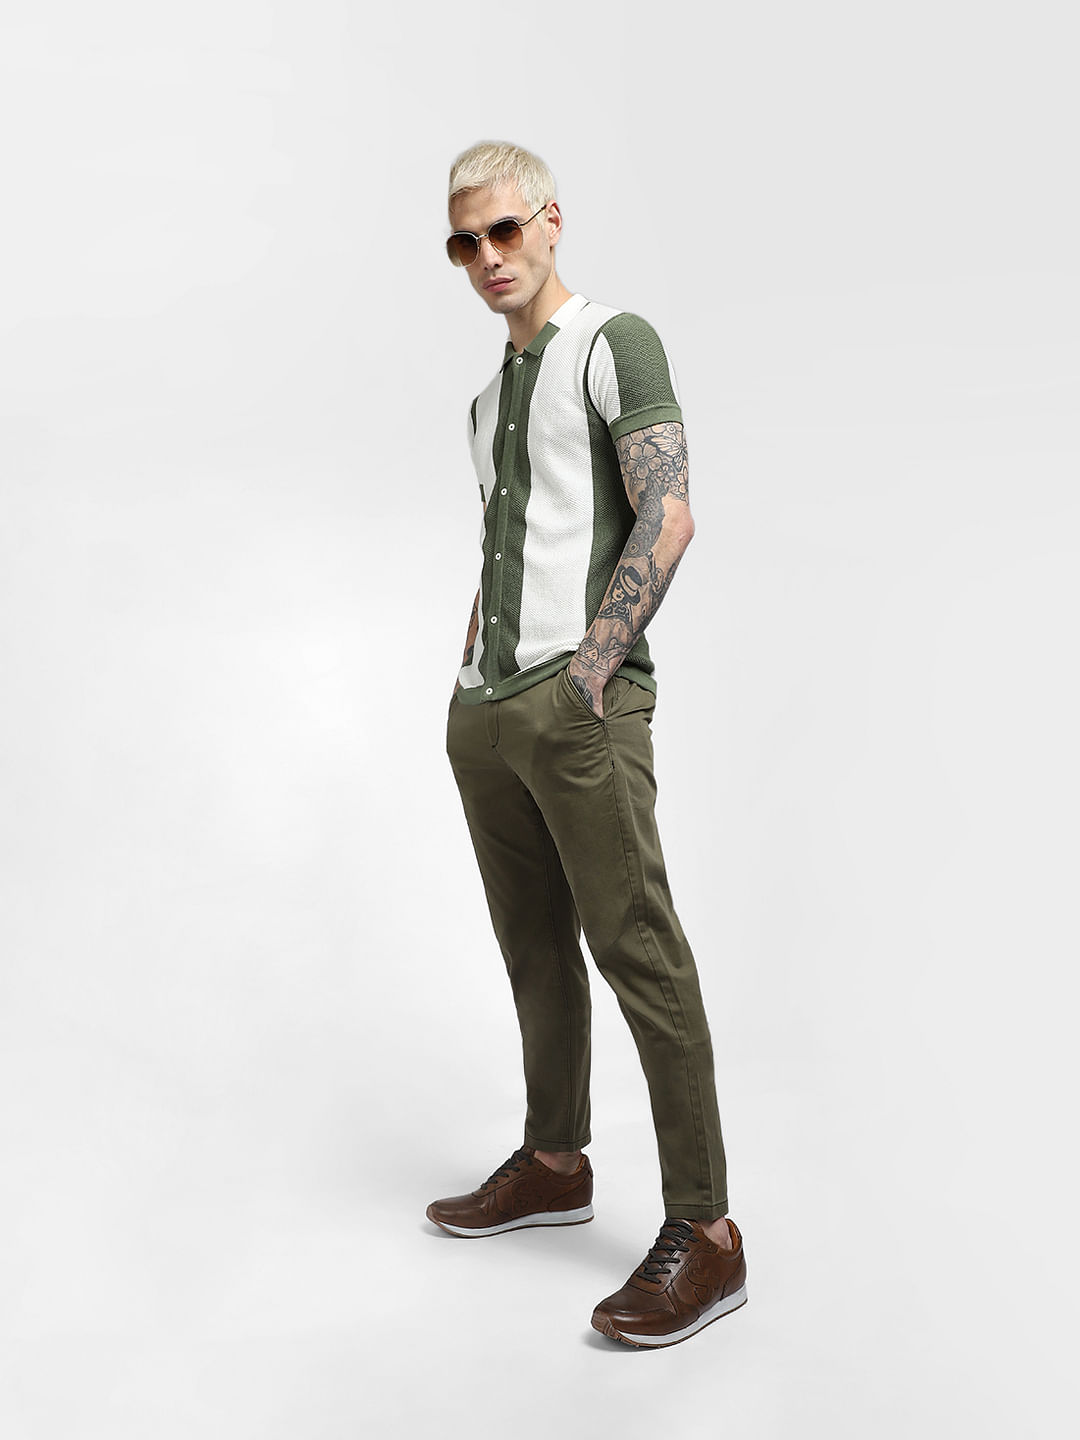 Buy Men's Trousers | How To Choose Pants Based On Style, Fit, & Fabric